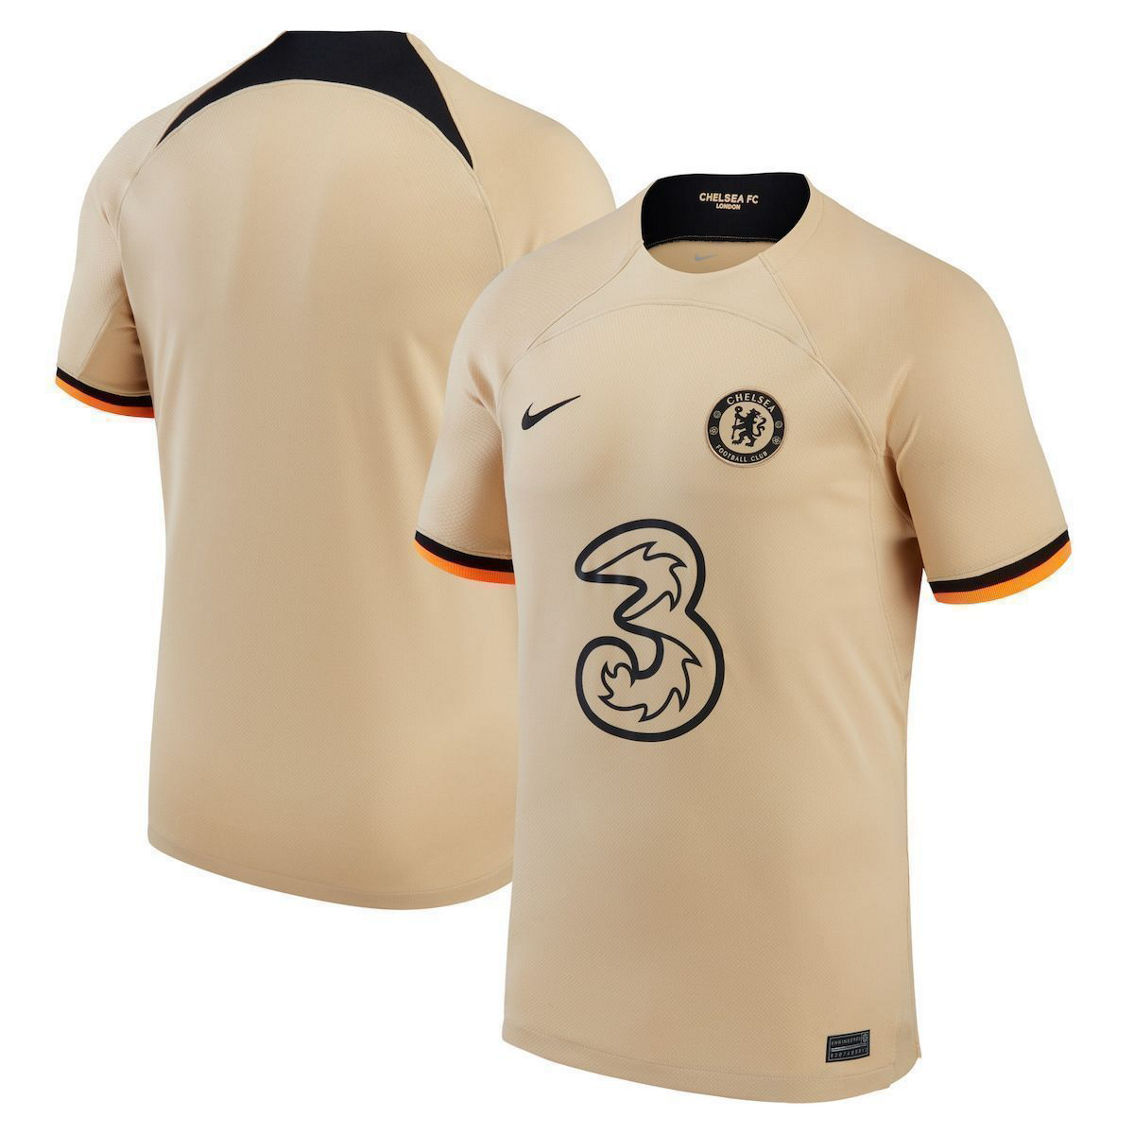 Nike Men's Gold Chelsea 2022/23 Third Replica Jersey - Image 1 of 4